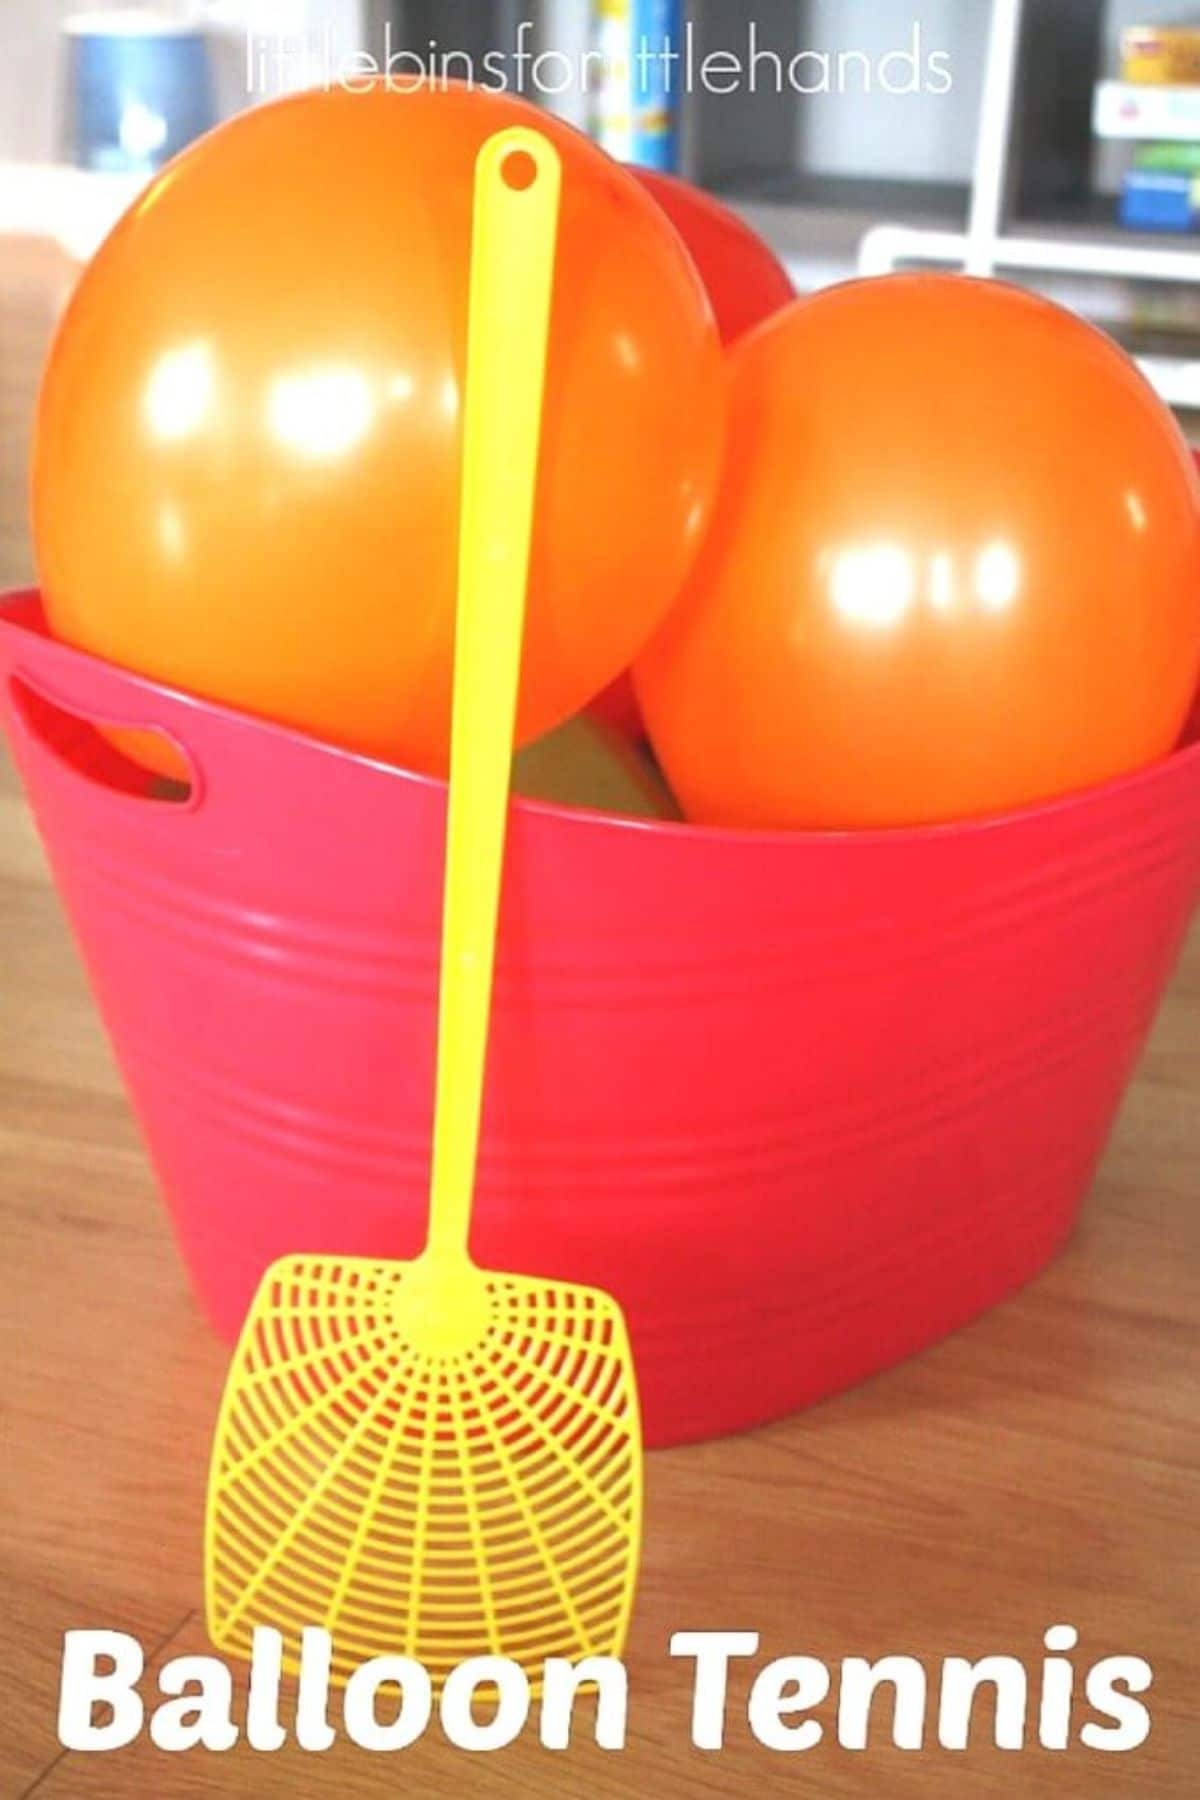 a red plastic basket with orange balloons in it. In front of it is a yellow fly swatter and the text "Balloon tennis"